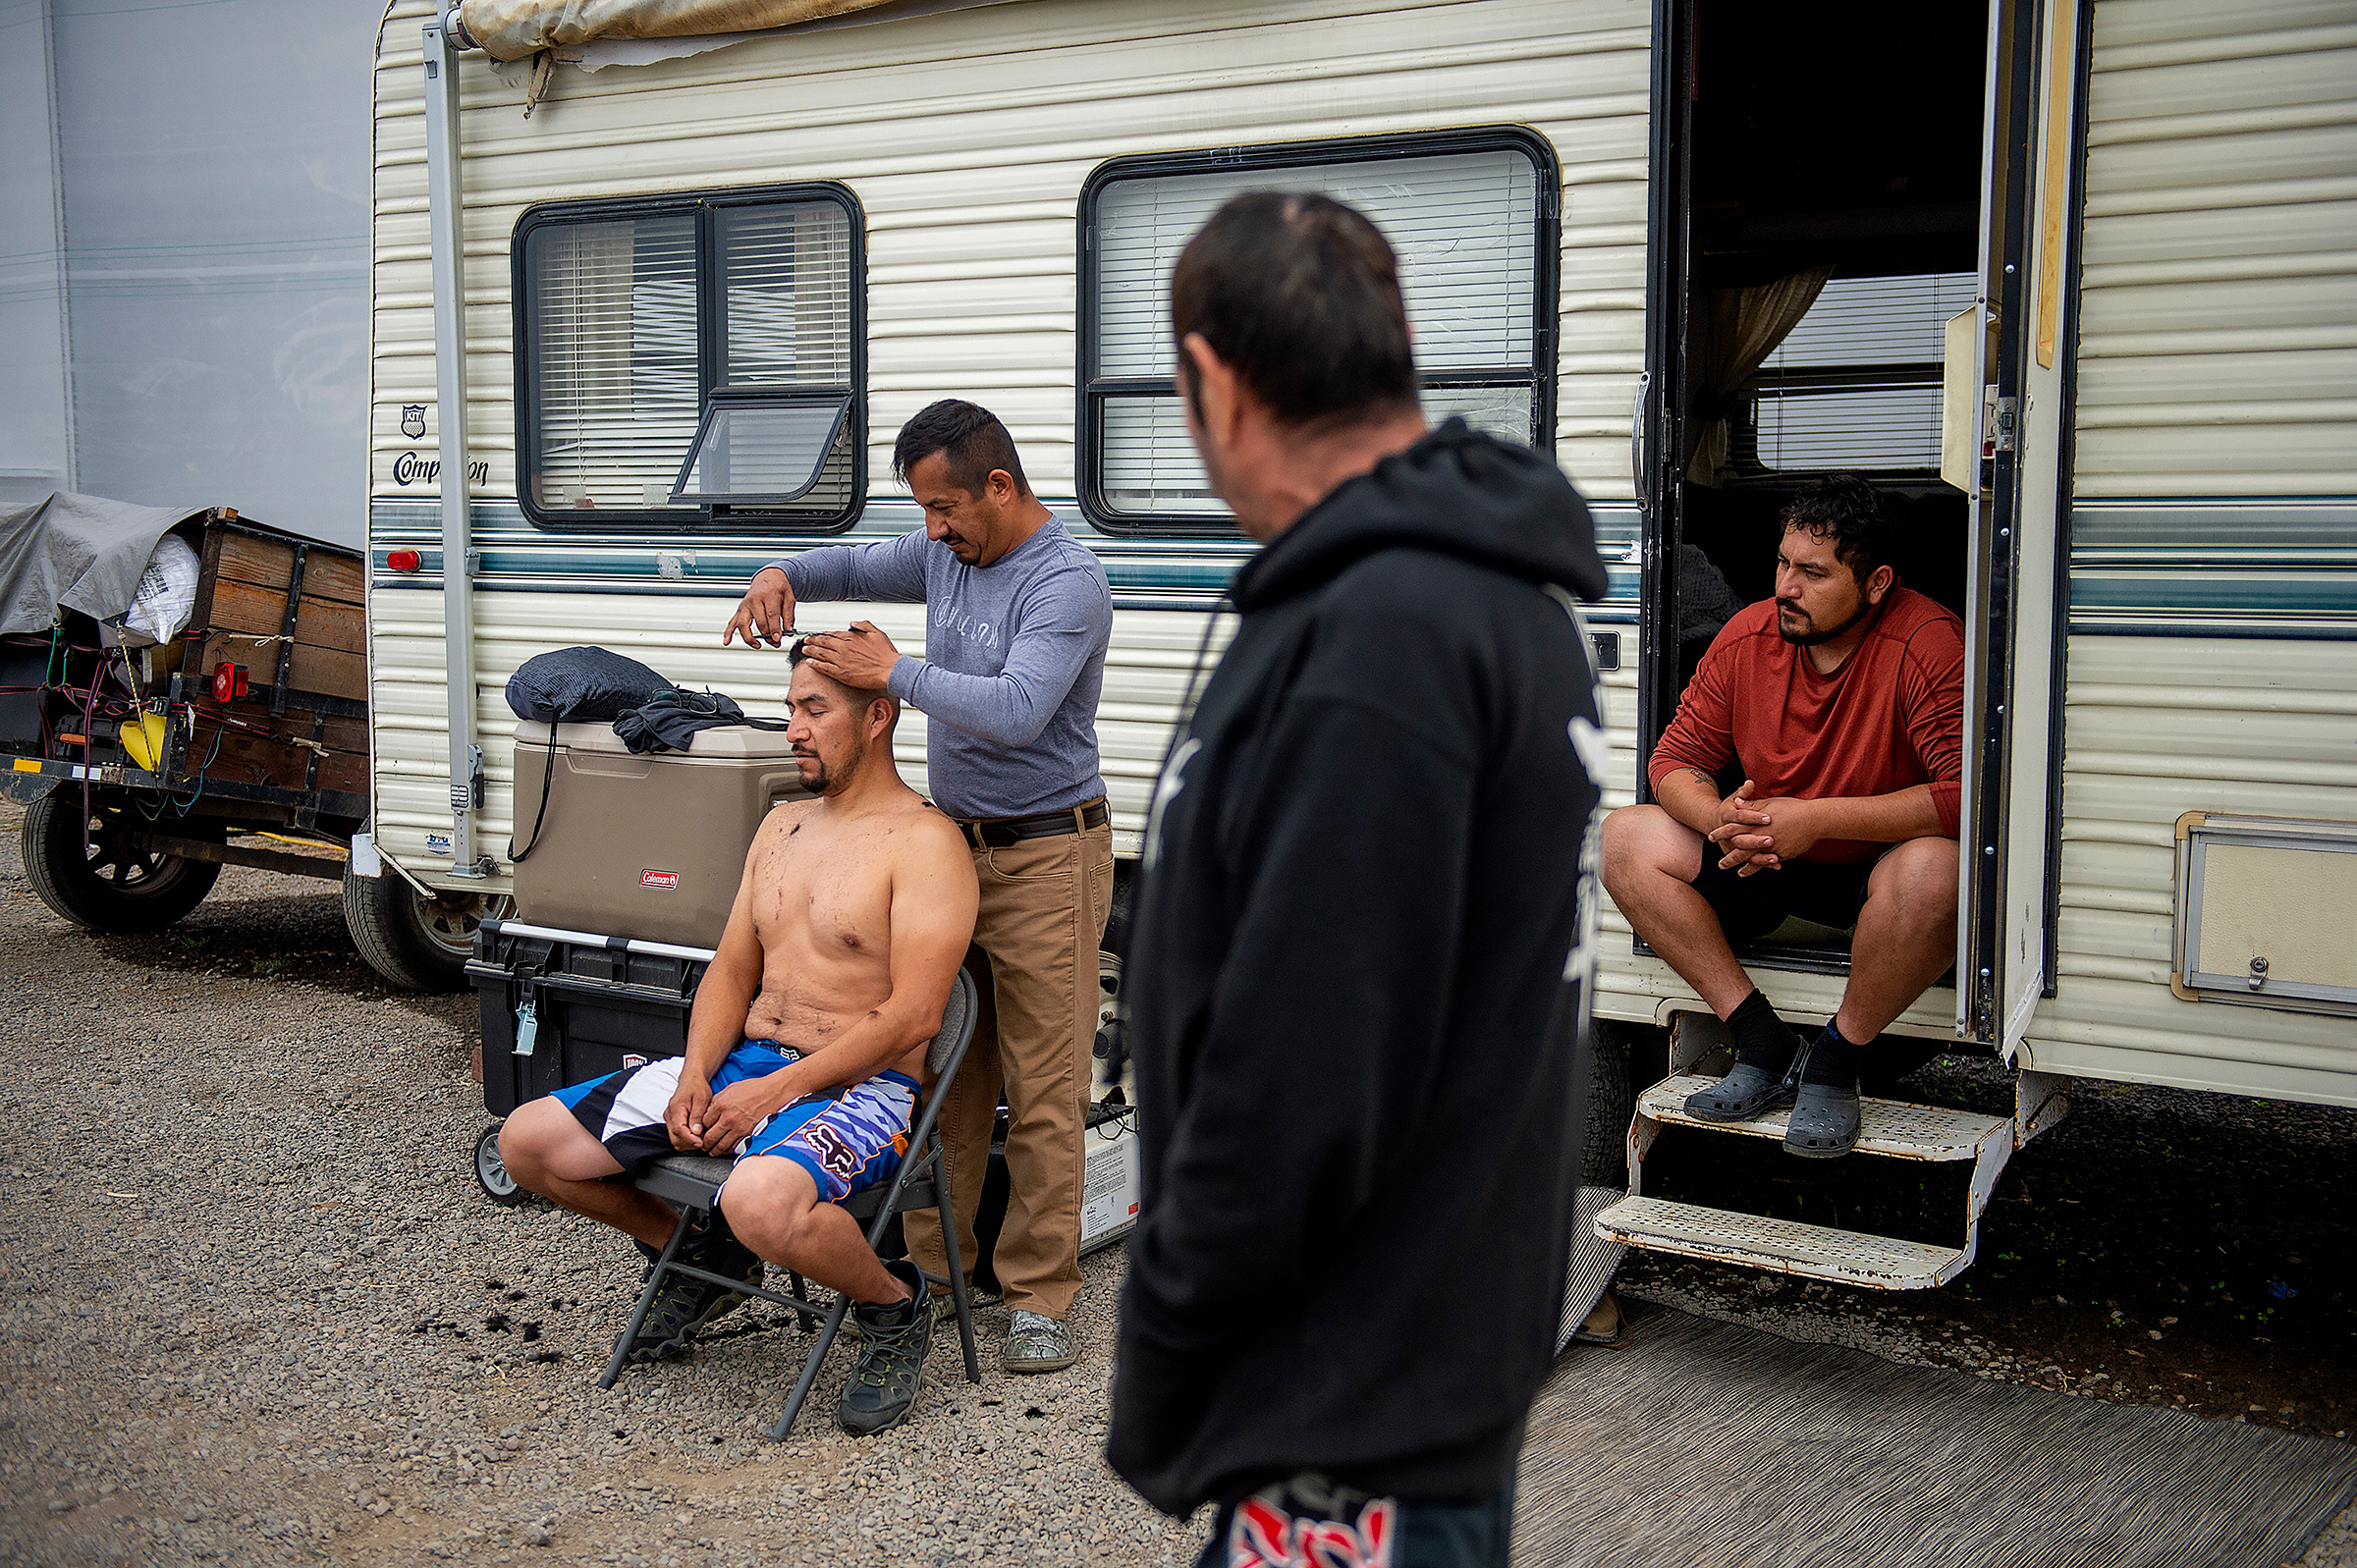 Julio Hernandez cuts the hair of his brother, Alvaro Hernandez, at a farm that opened space to people displaced by wildfires in Central Point, Ore., on Sept. 26, 2020. The Almeda Fire leveled some of the only affordable housing for the immigrants who work the fields, kitchens and construction sites of southern Oregon.